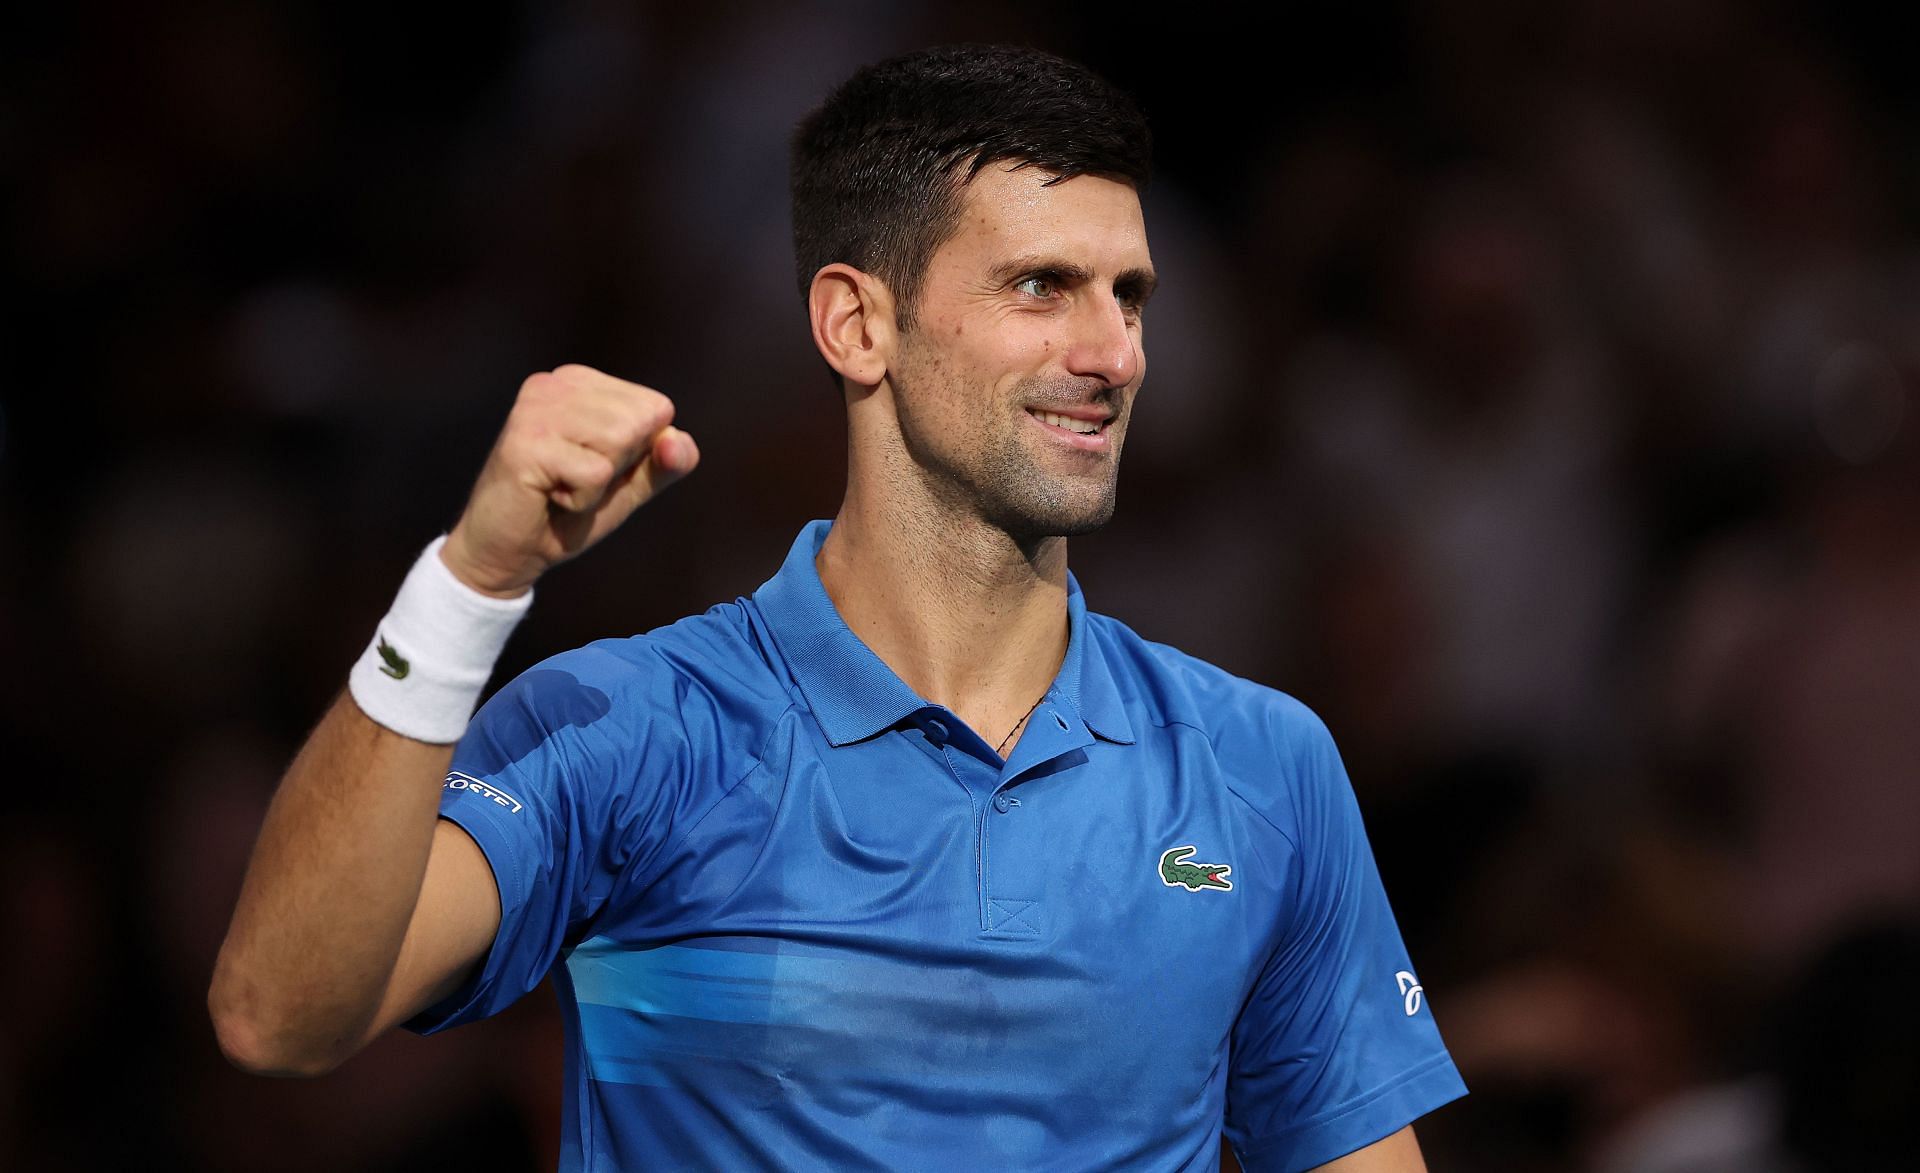 Novak Djokovic overtakes Pete Sampras' record of most indoor Masters 1000 wins following defeat of Maxime Cressy  at 2022 Paris Masters